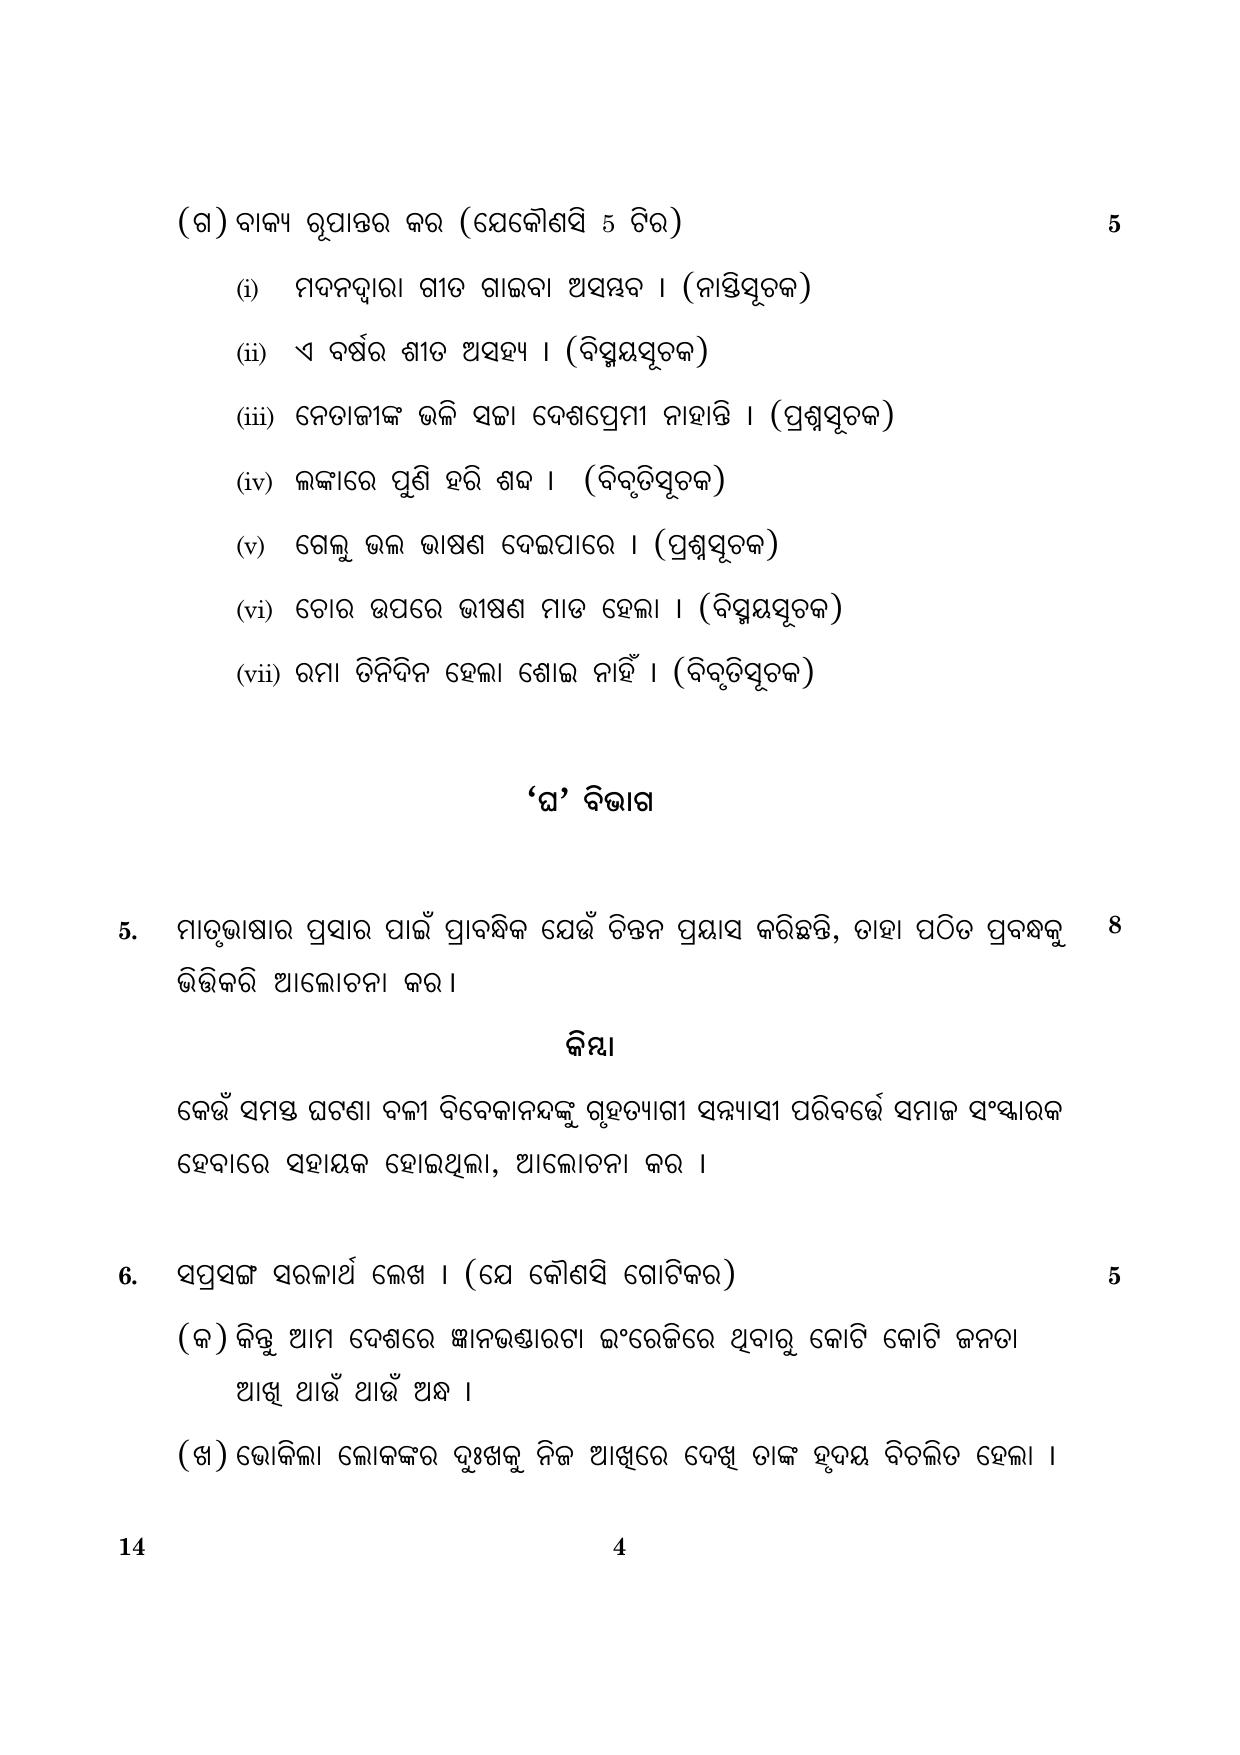 CBSE Class 10 014 Odia 2016 Question Paper - Page 4